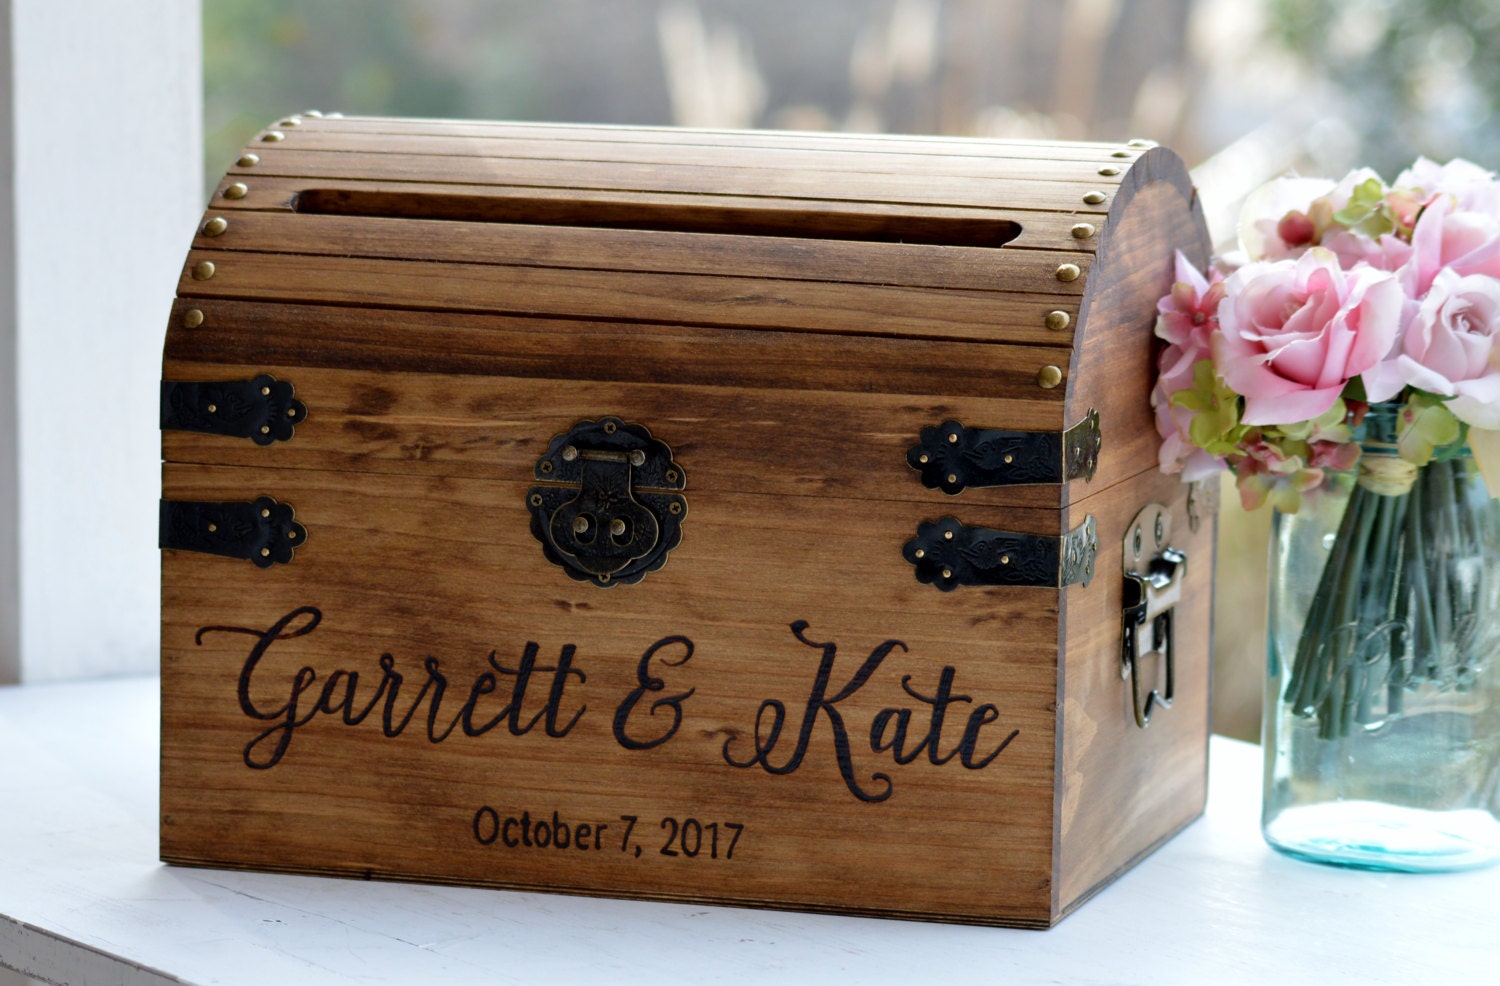 Great Lakes Memories GLM Wedding Card Box with Lock and Key, Card Box for Wedding, Rustic Wedding Decorations for Reception, Wedding Card Boxes for